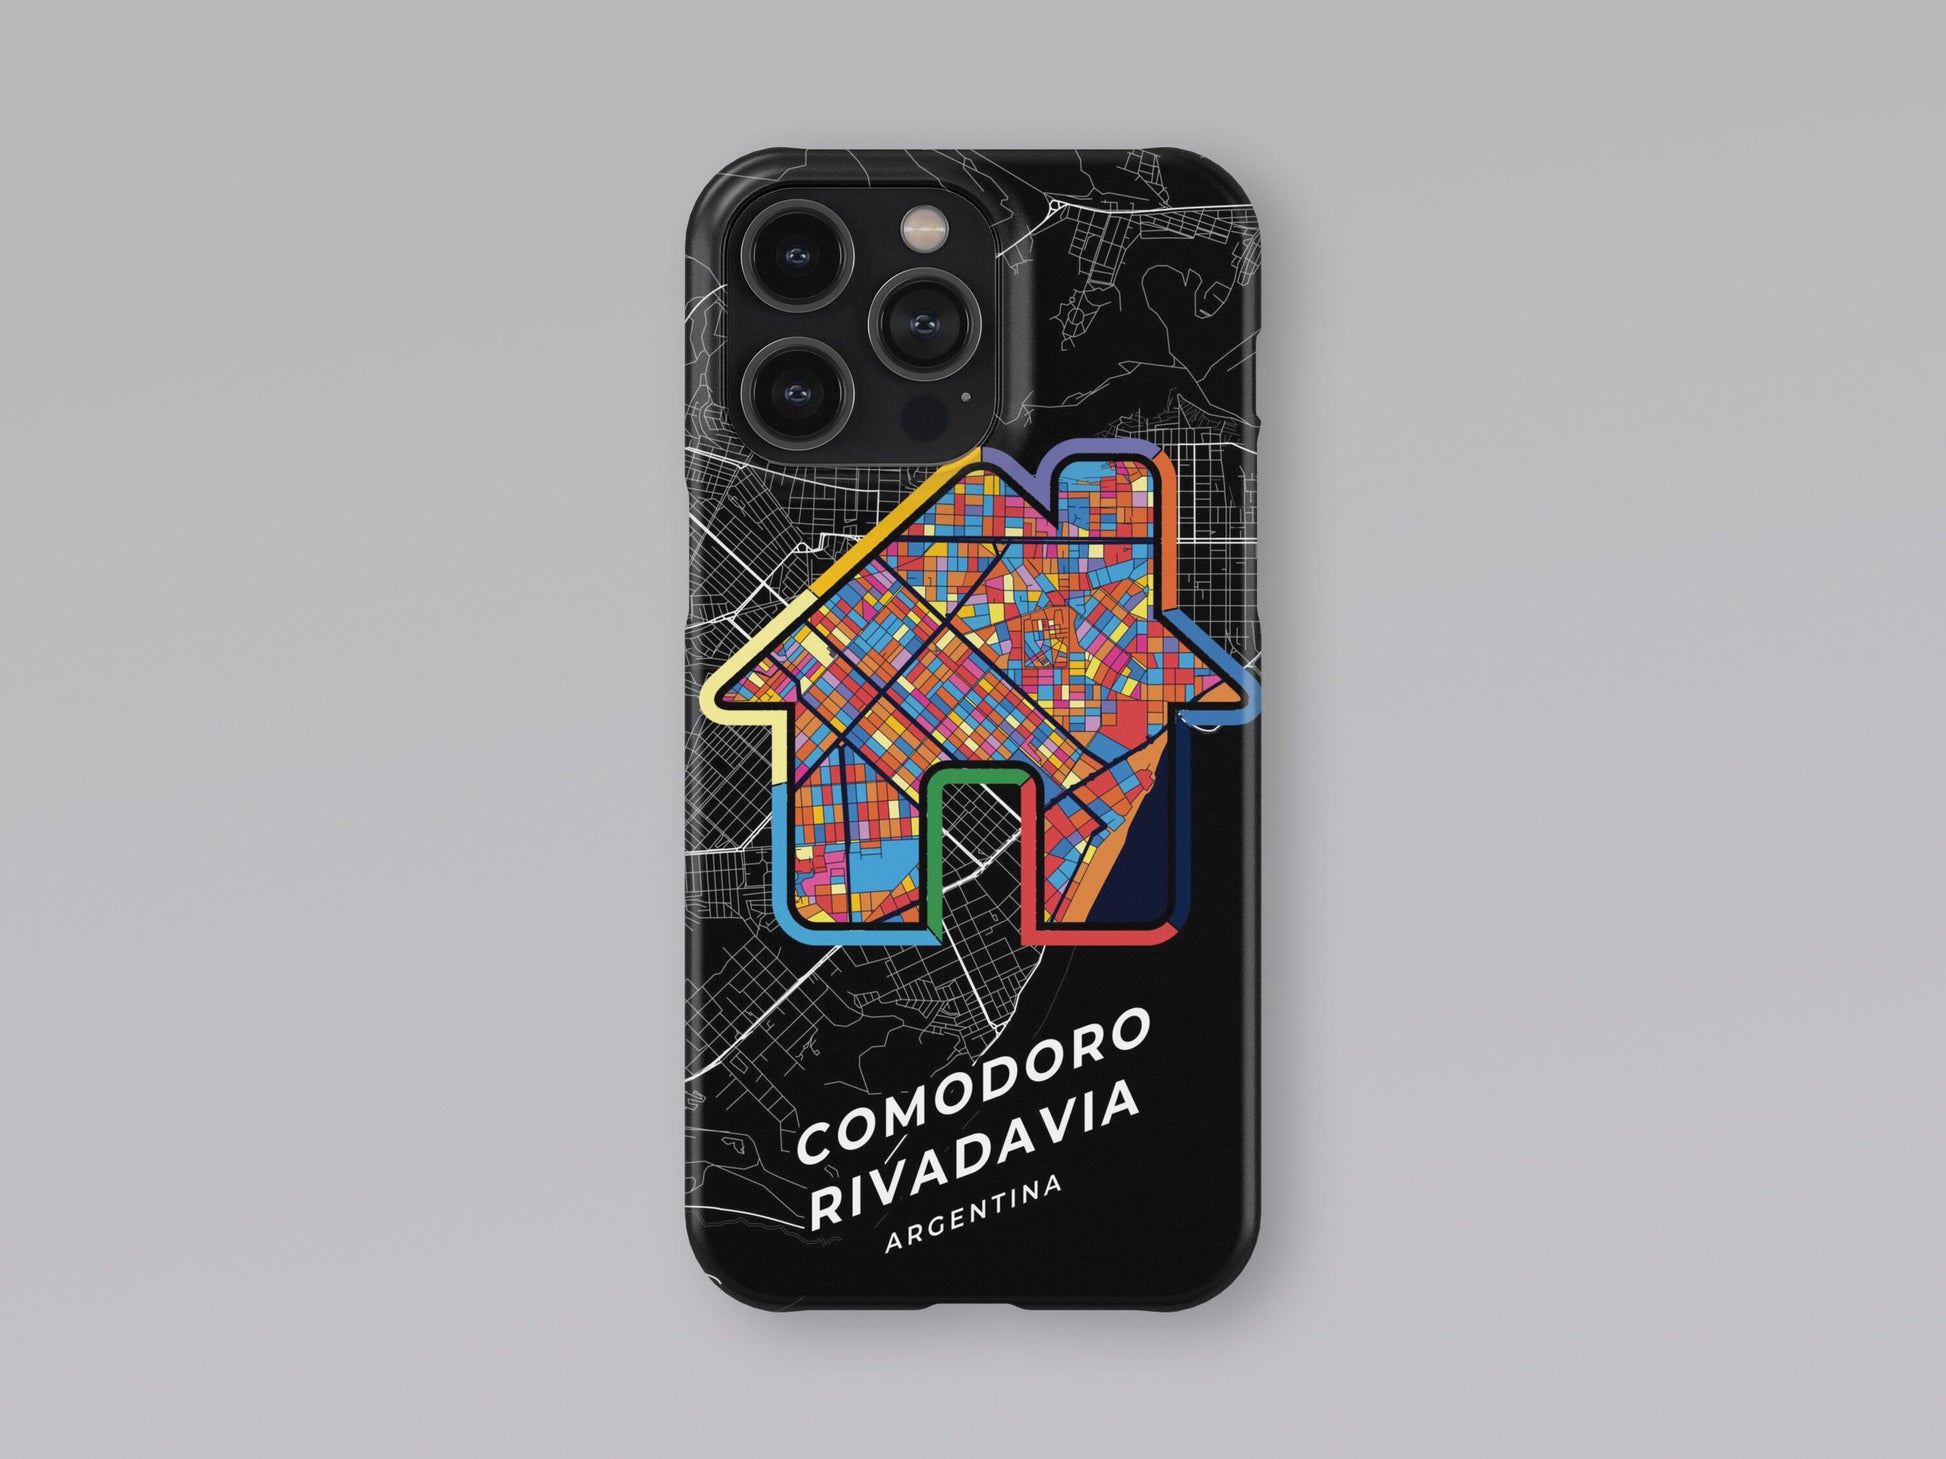 Comodoro Rivadavia Argentina slim phone case with colorful icon. Birthday, wedding or housewarming gift. Couple match cases. 3